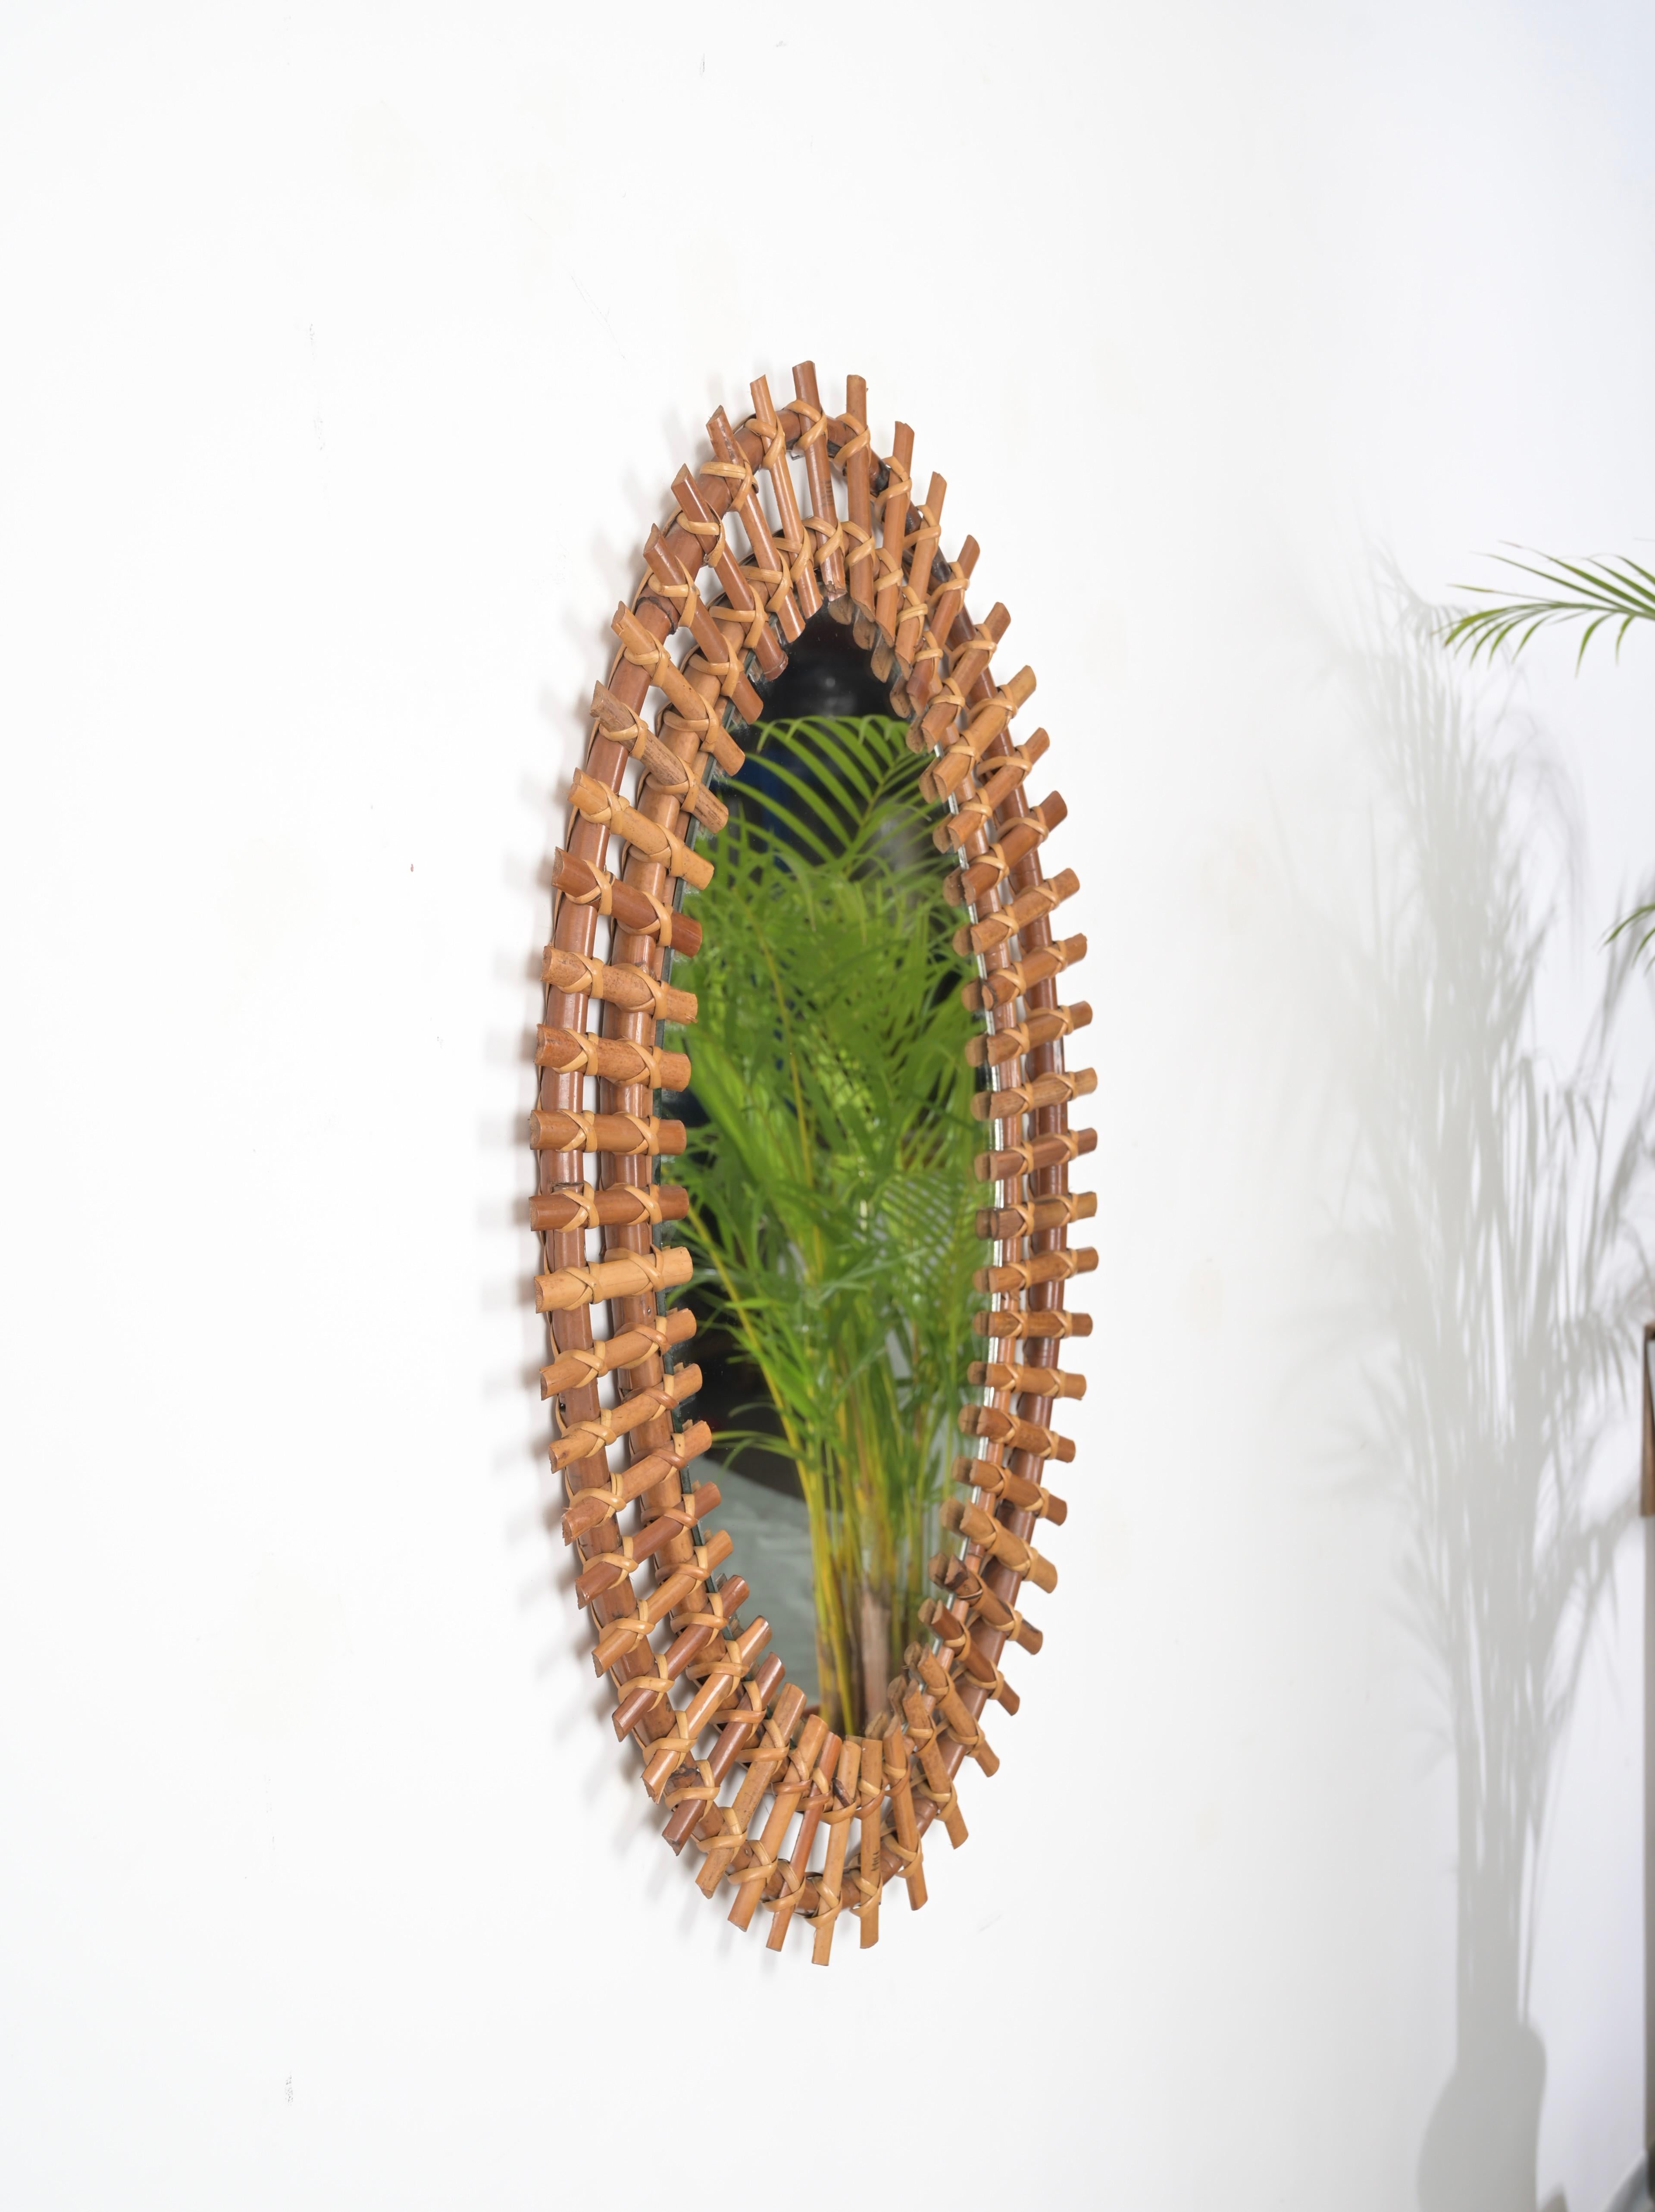 Italian Midcentury French Riviera Oval Mirror in Rattan Wicker and Bamboo, Italy 1960s For Sale